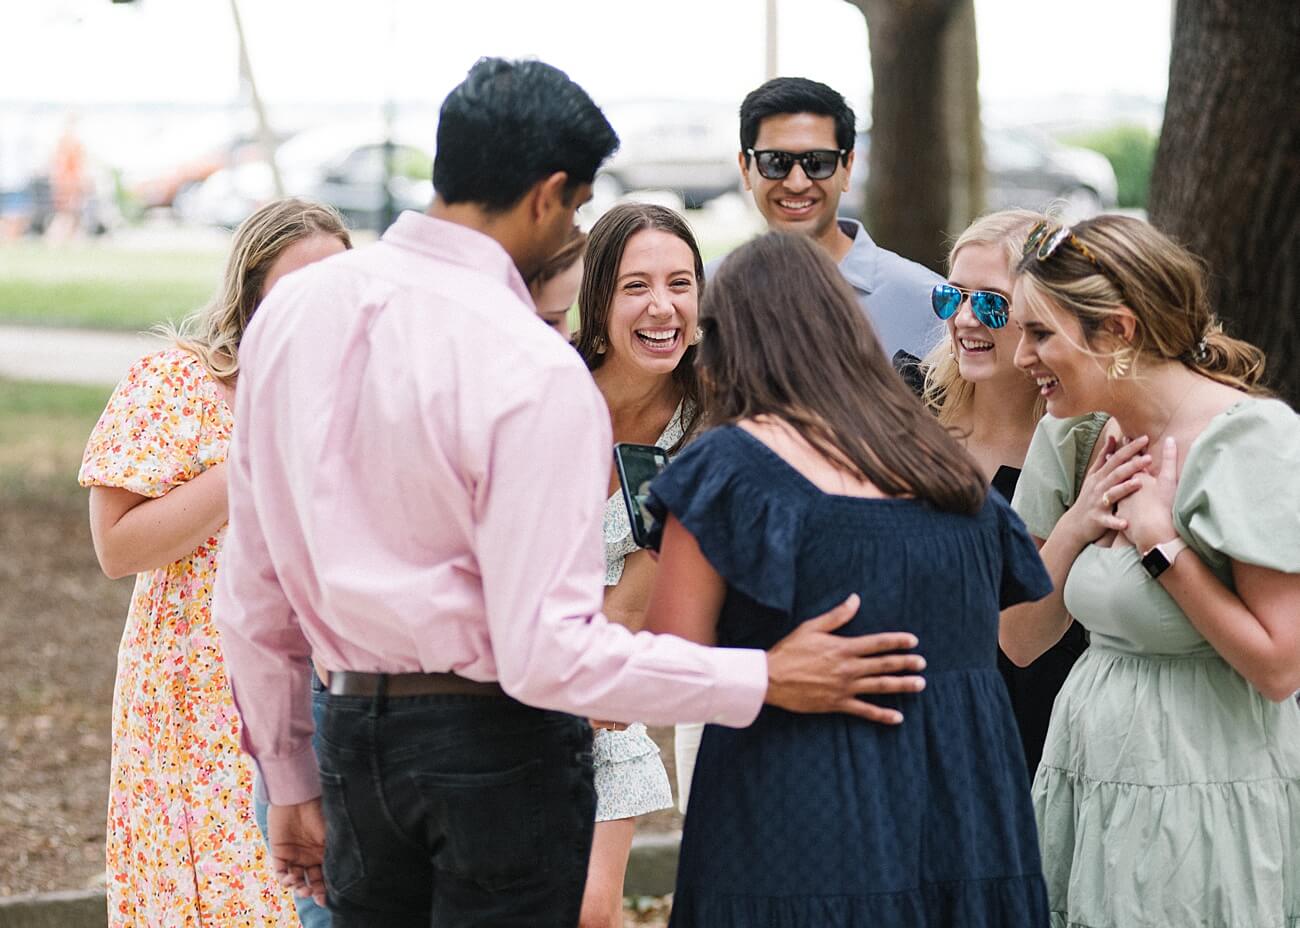 Young bride-to-be surprised during engagement proposal